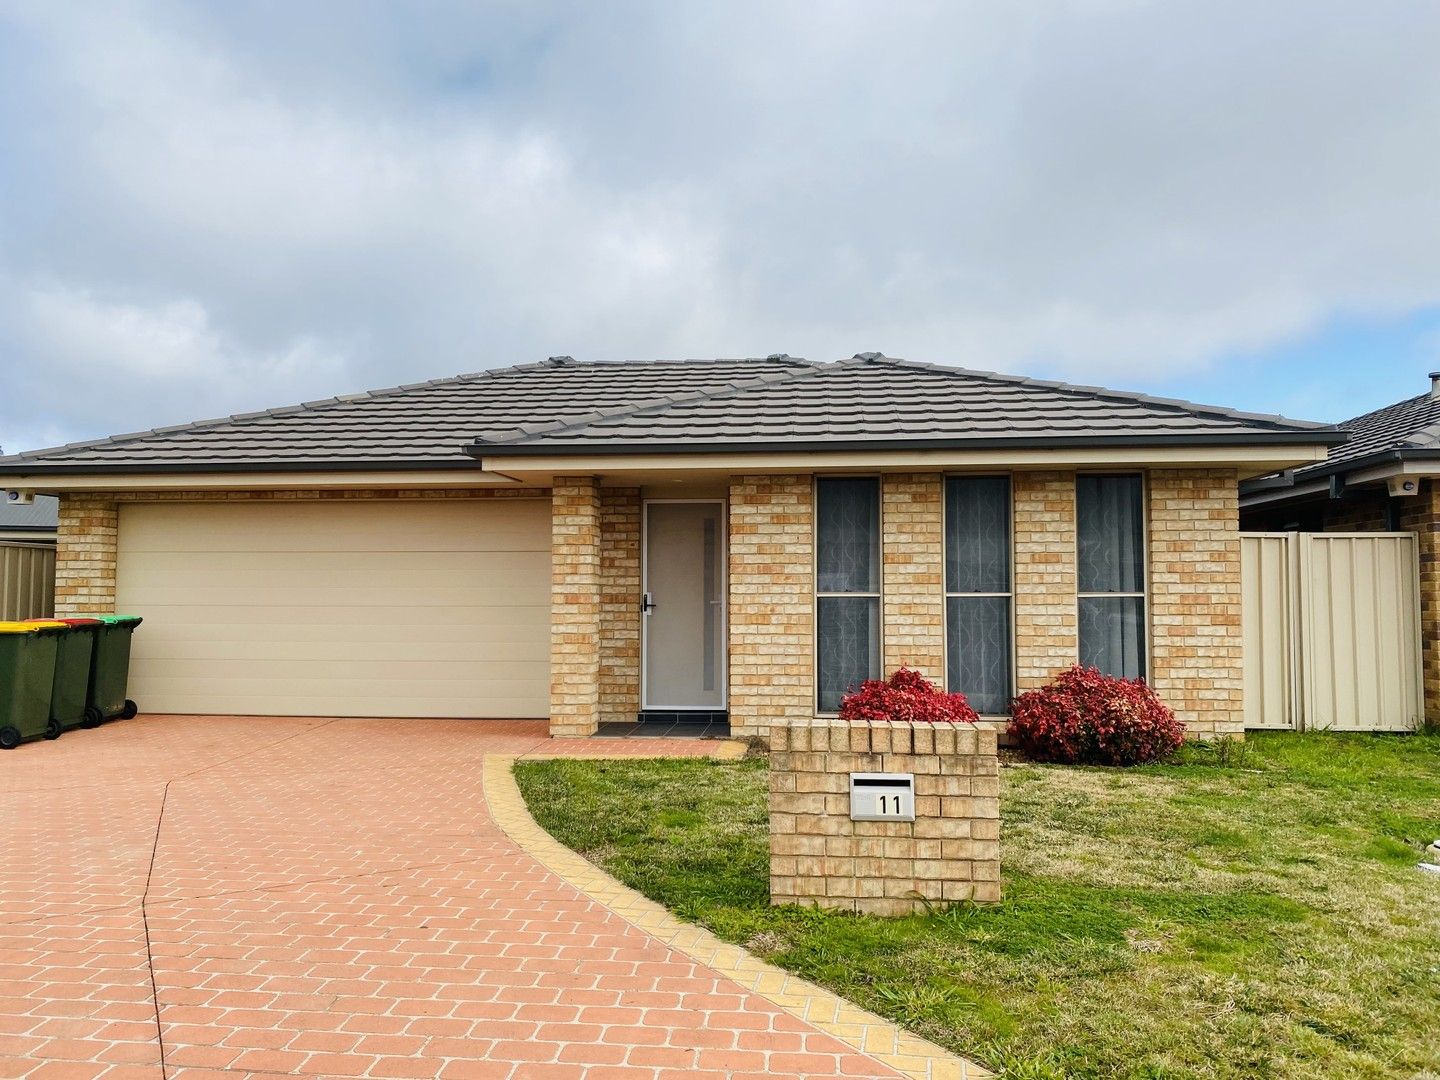 3 bedrooms House in 11 Onyx Place ORANGE NSW, 2800